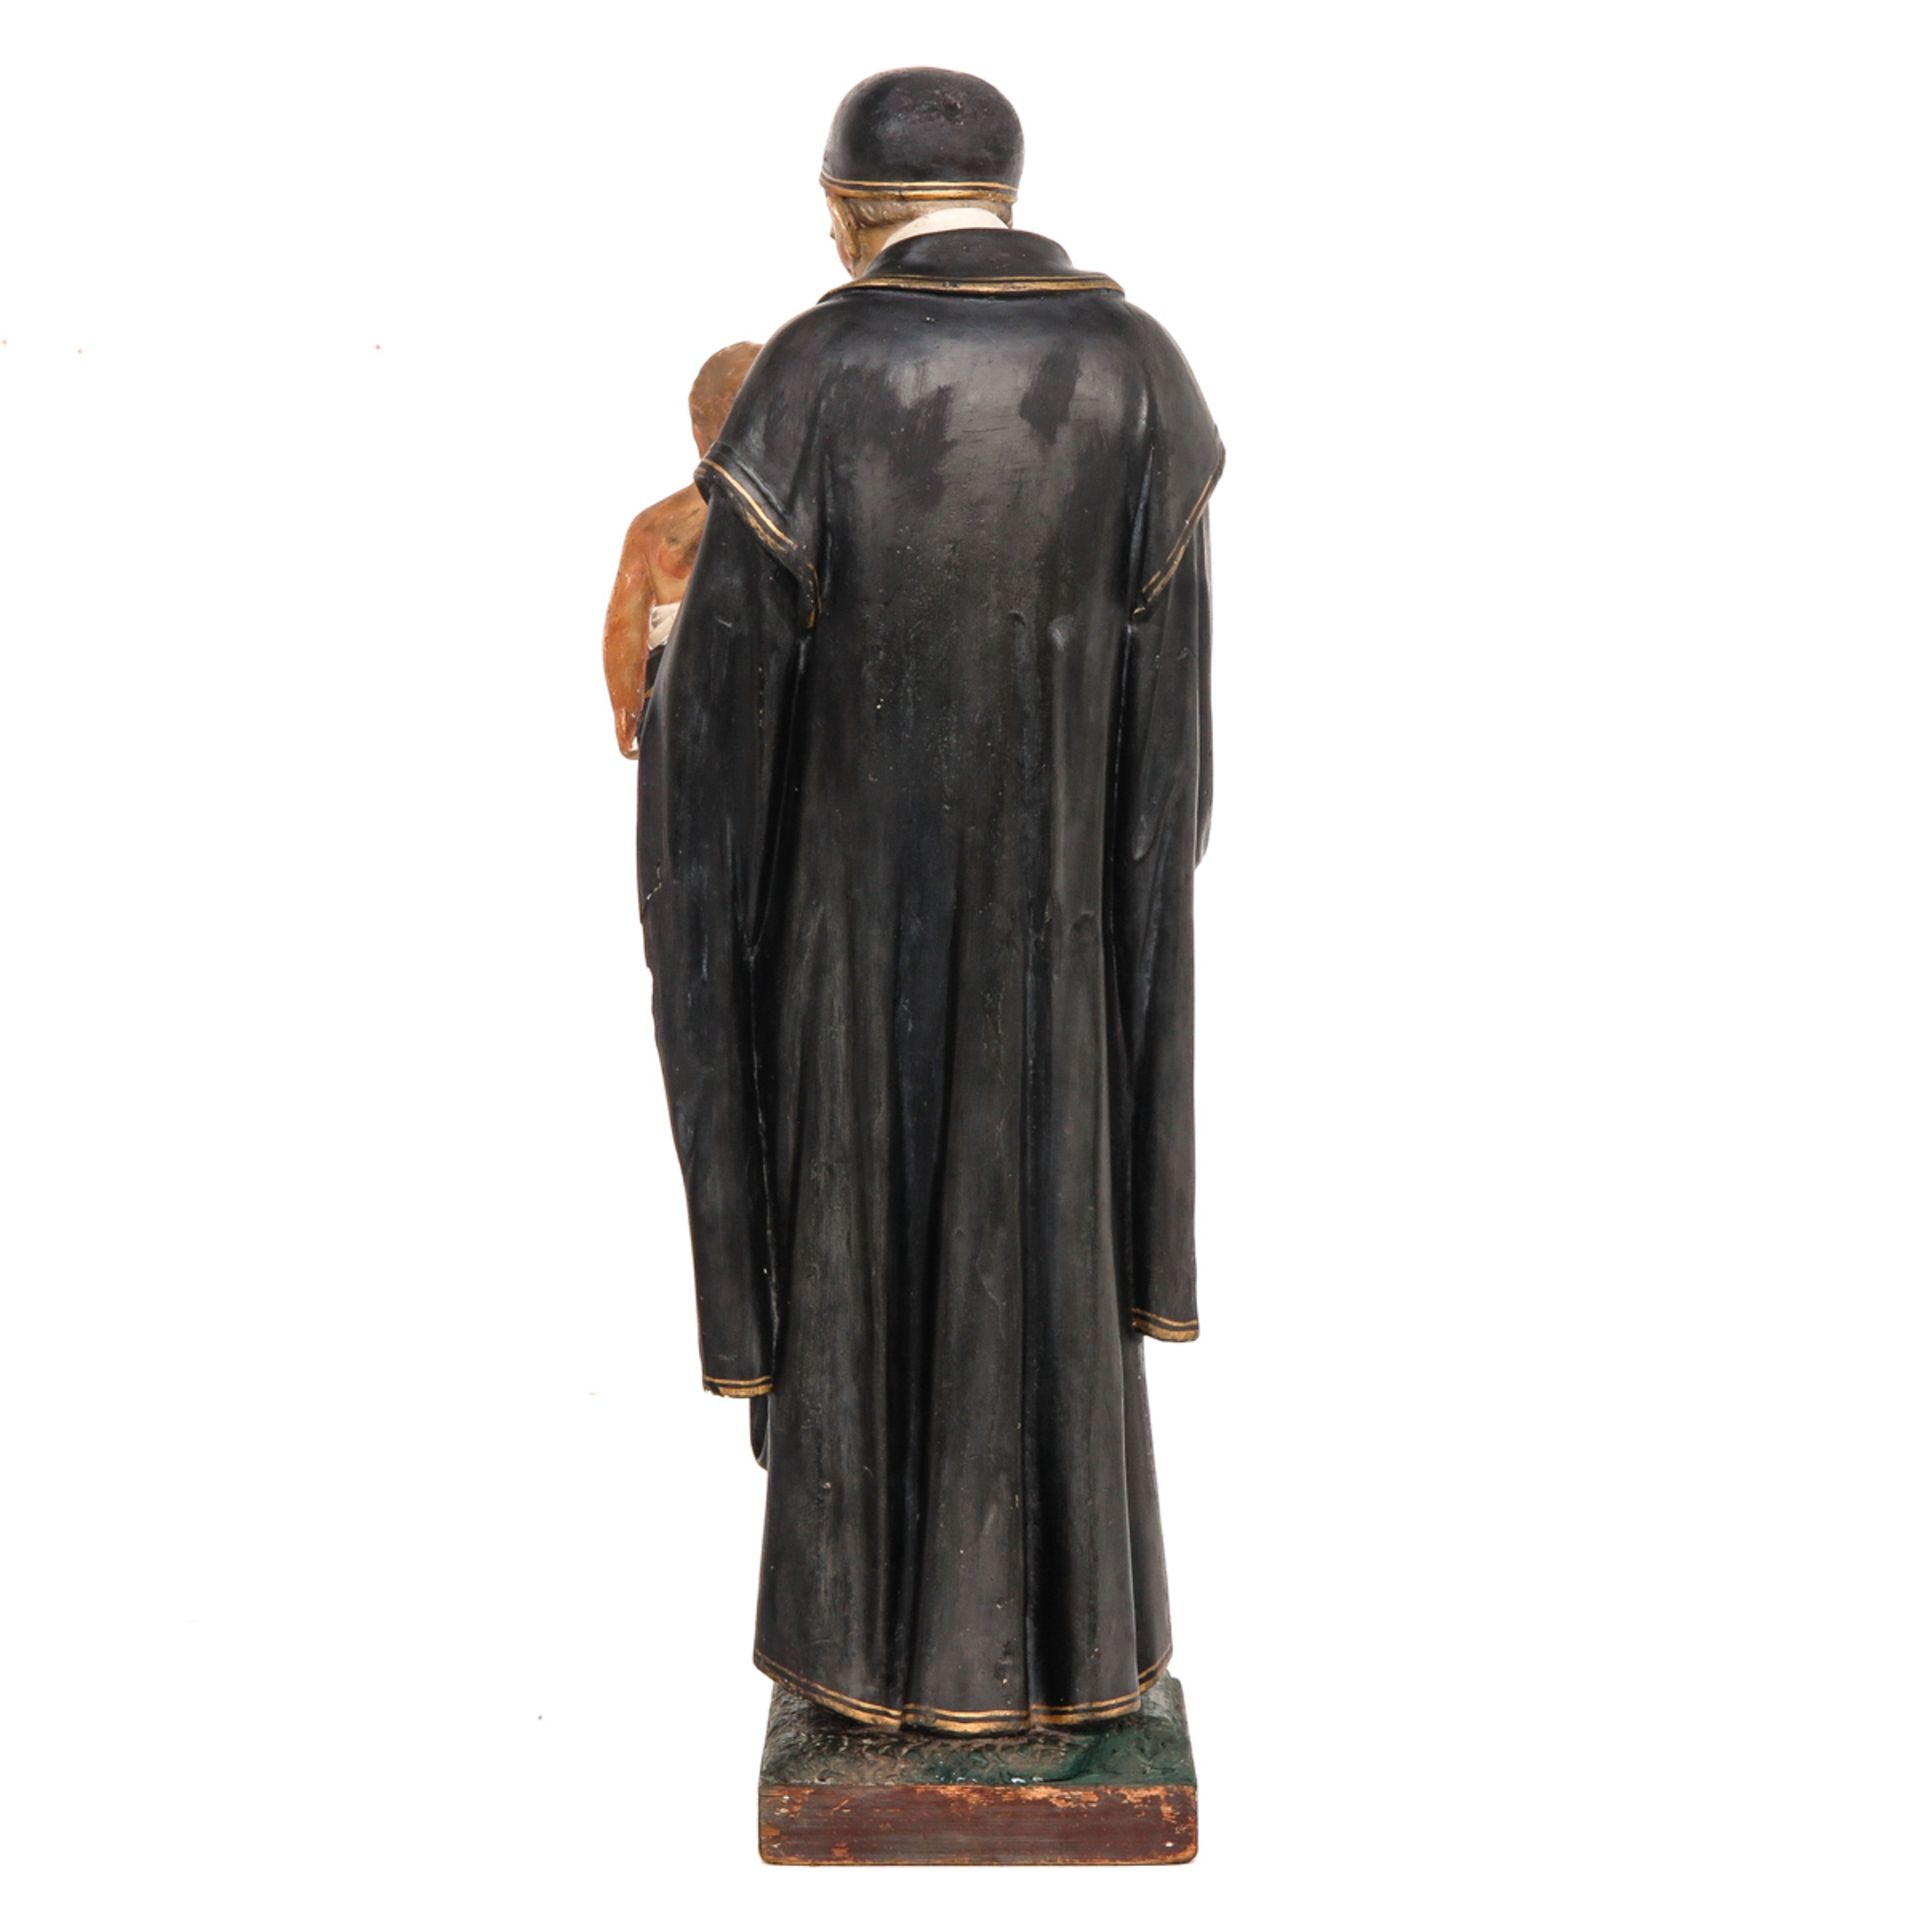 A 19th Century Sculpture of Saint Anthony - Image 3 of 8